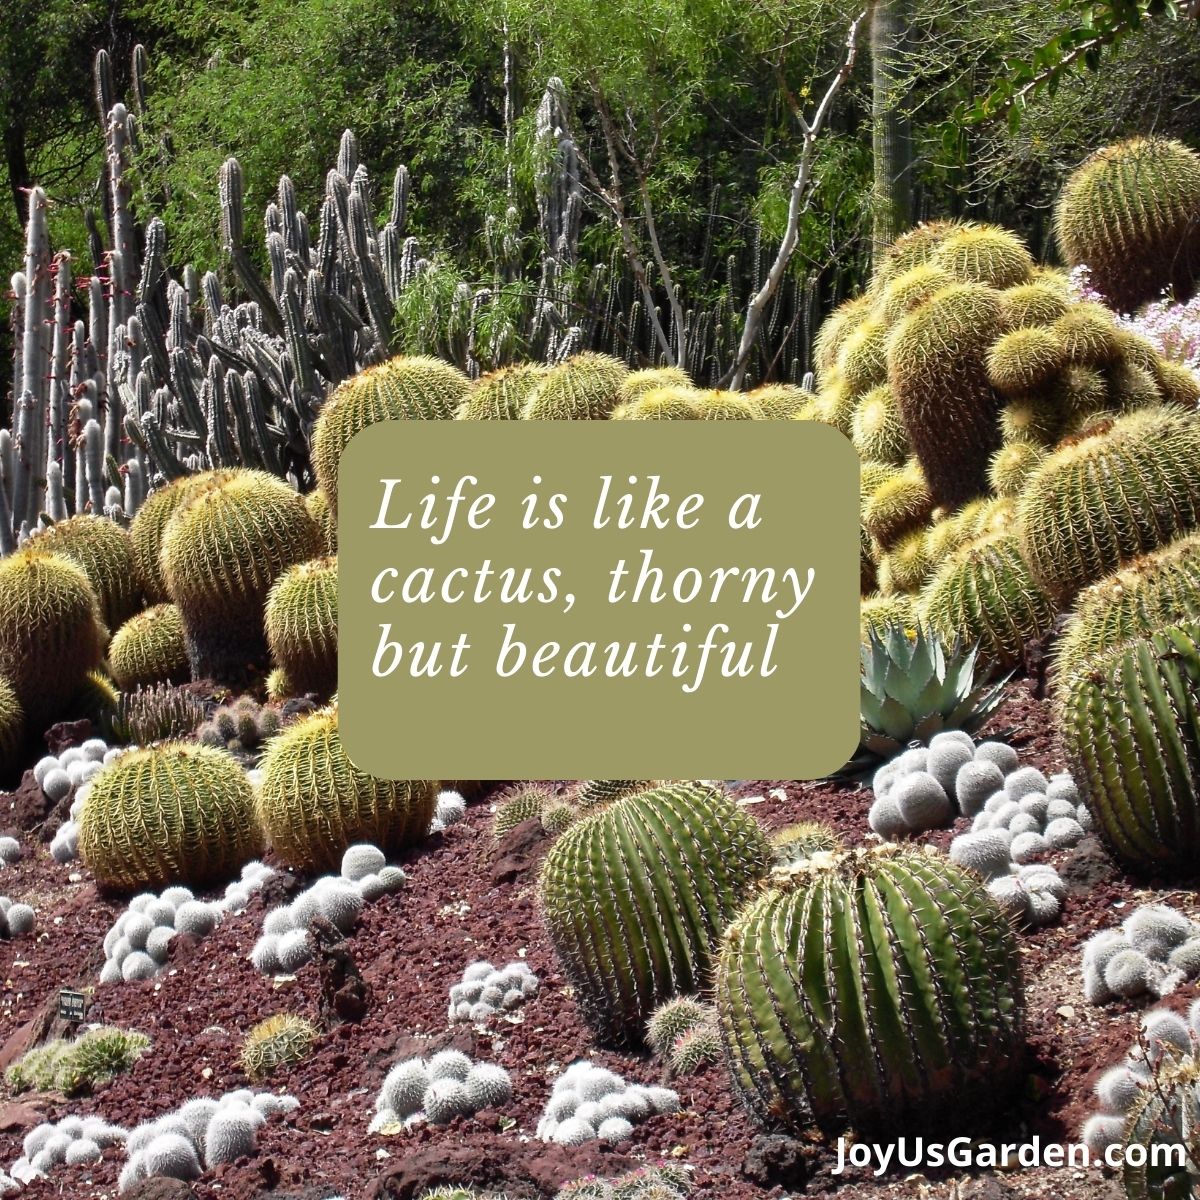 a cactus garden full of golden barrel cactus and other cactus varieties plant quotes reads Life is like a cactus, thorny but beautiful.